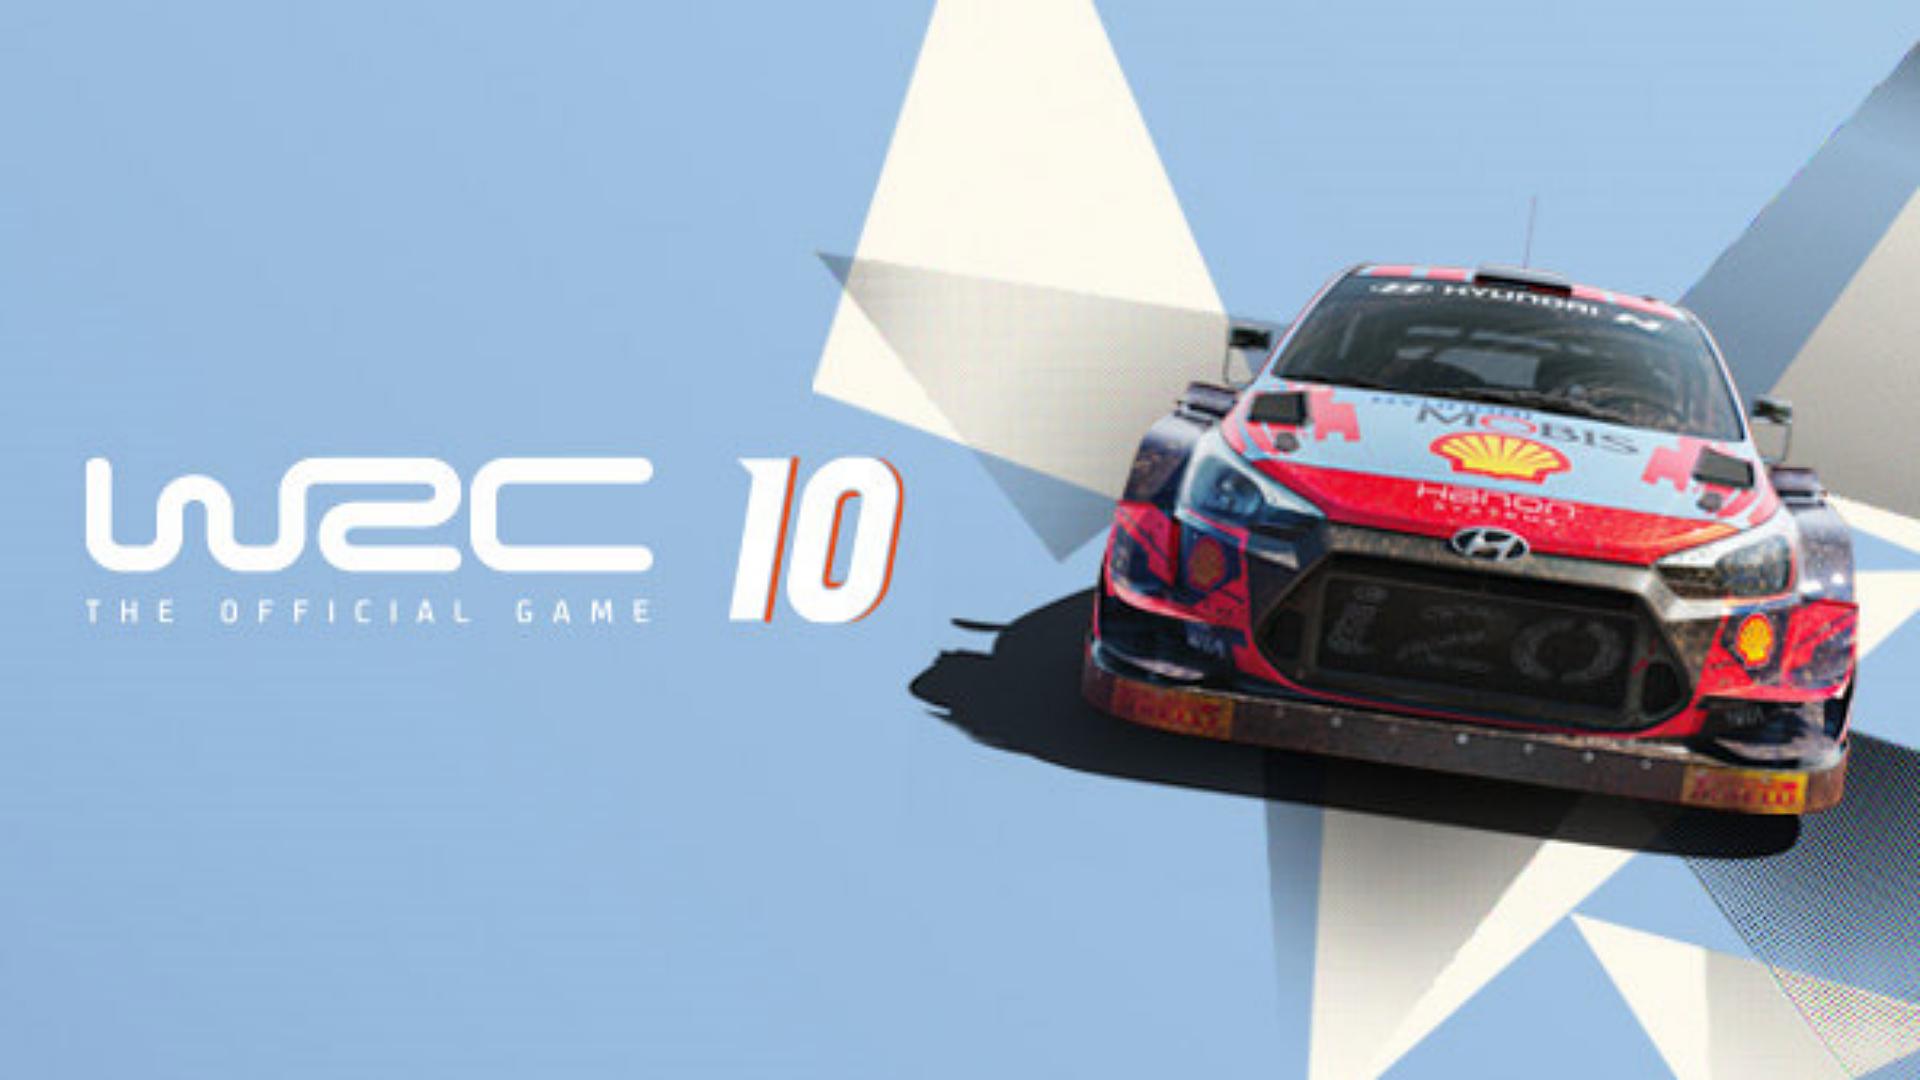 WRC 10 was officially announced, and will be released in September